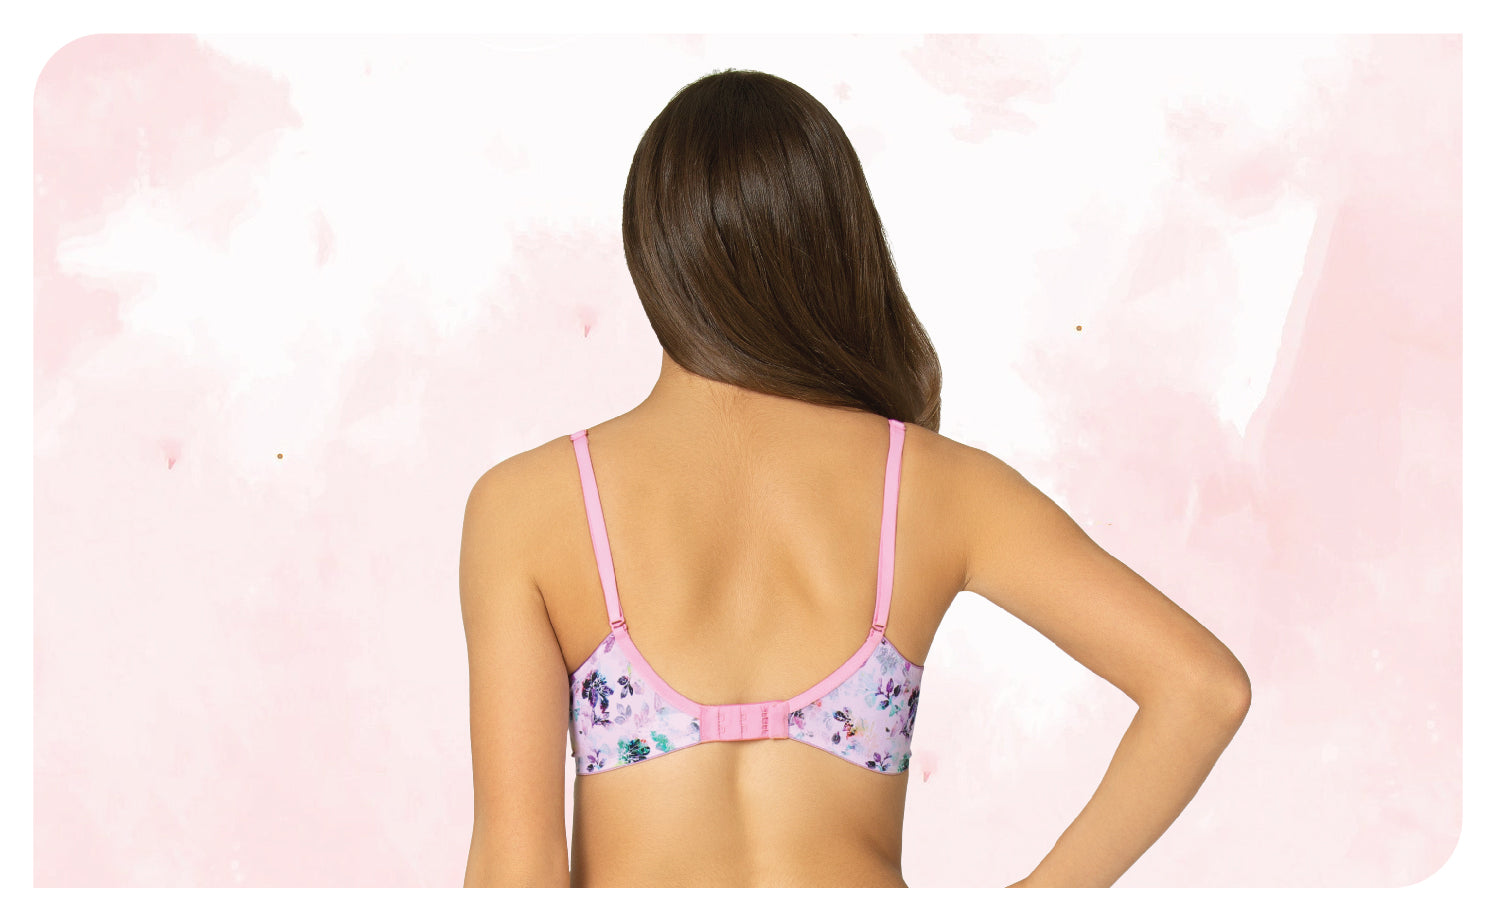 Best Nursing Bra Malaysia - 10 Signs You're Wearing The Wrong Size Bra  -------------------------------------------------------------------------  1. Your straps keep falling down. First, tighten them a bit. They might  have stretched out in the